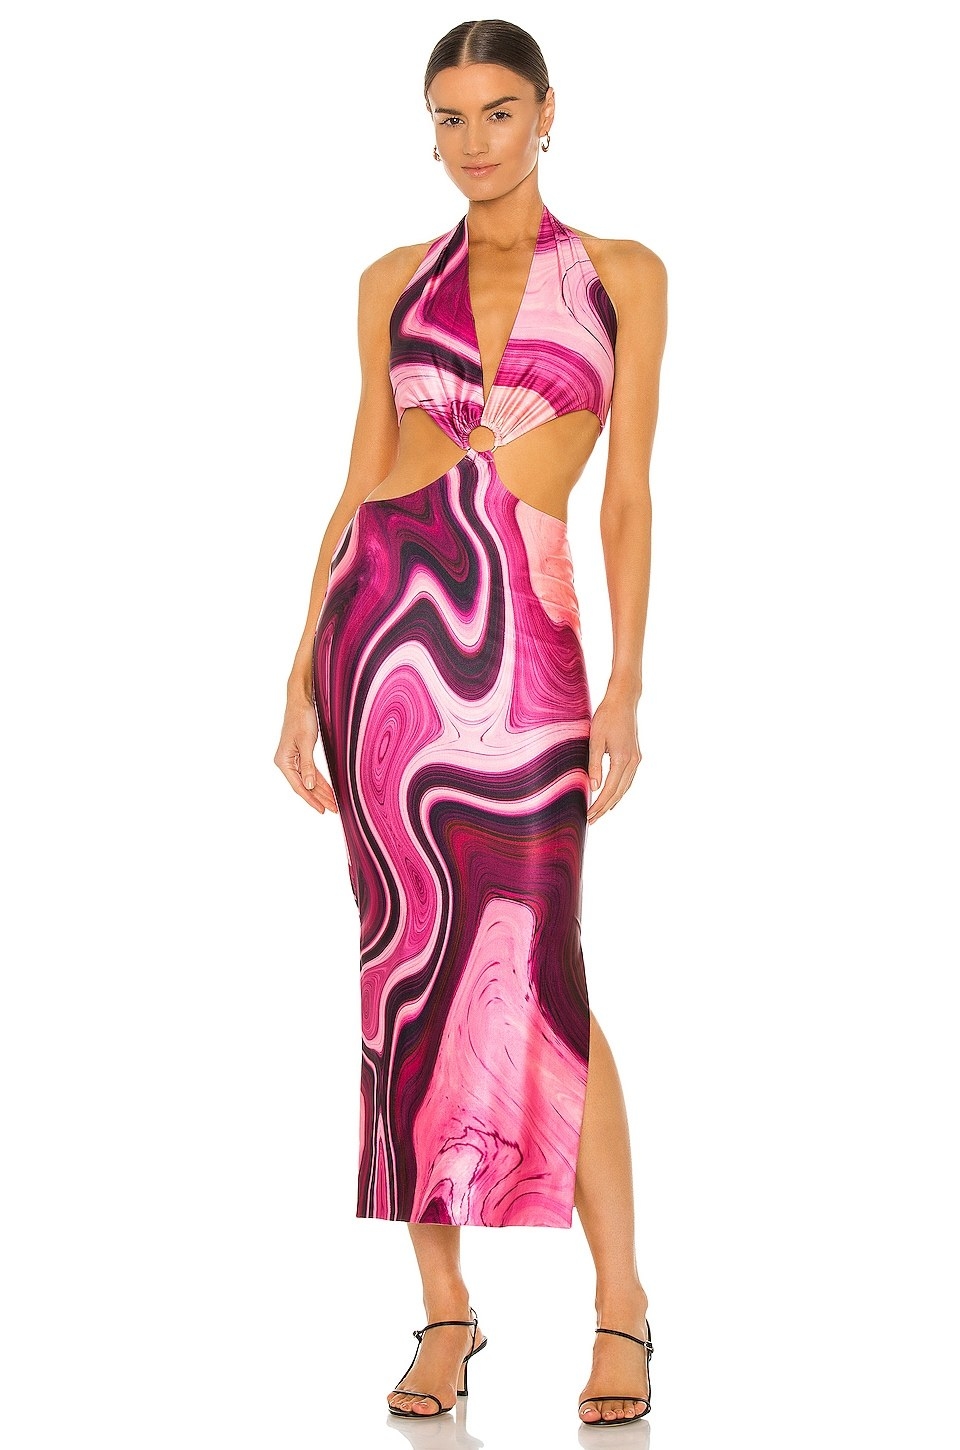 model wearing the pink marbled cut out dress